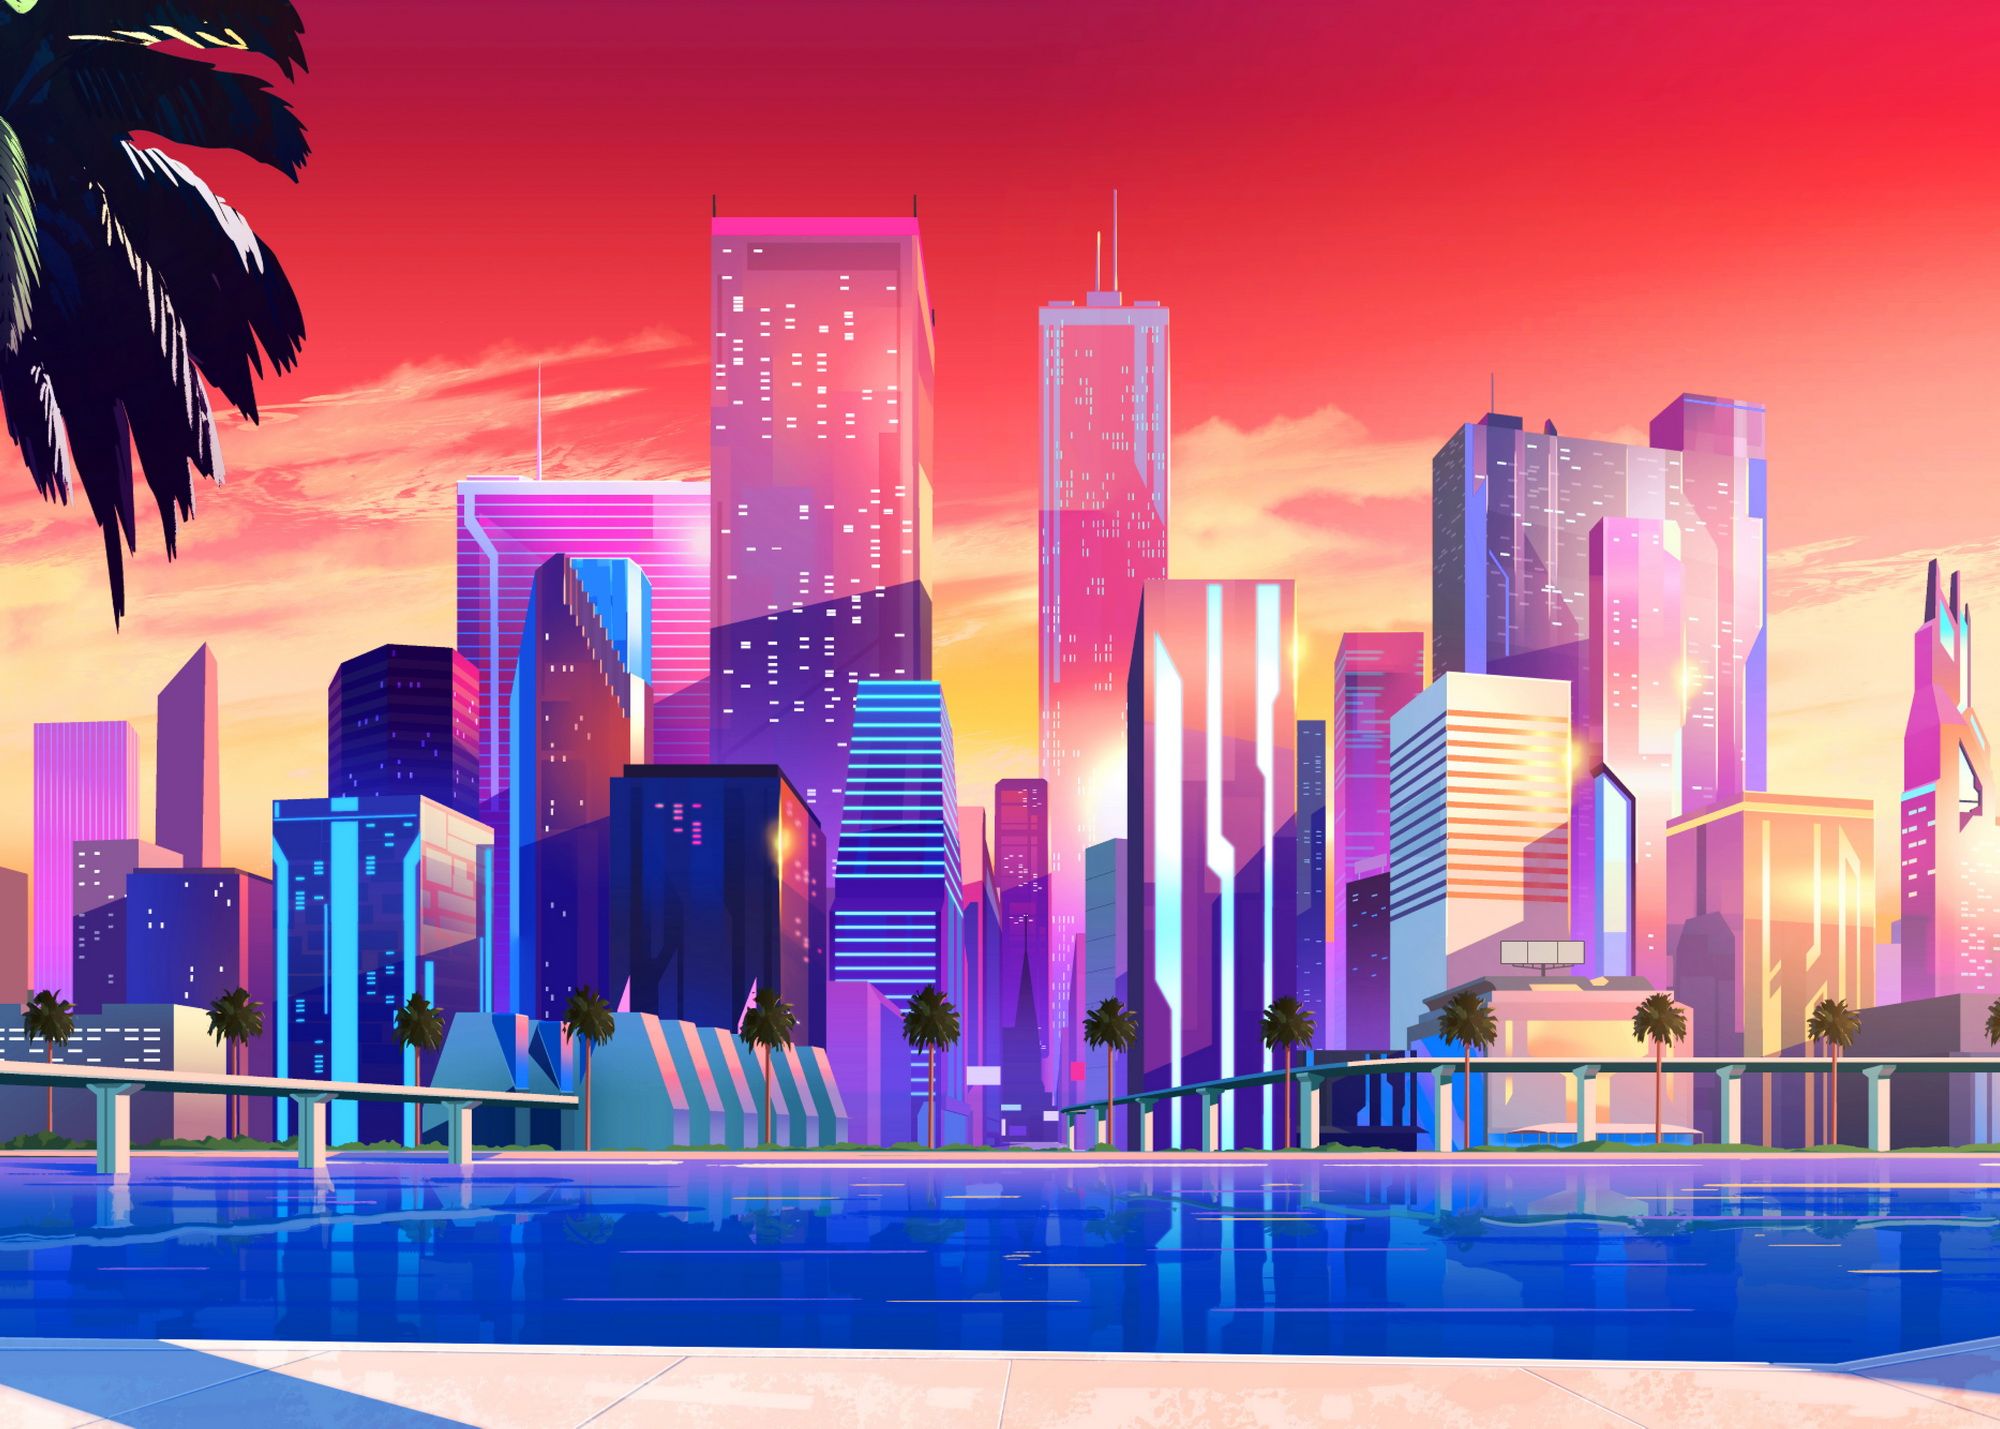 Vice City' Poster by Synthwave 1950. Displate. City wallpaper, Cityscape wallpaper, Synthwave